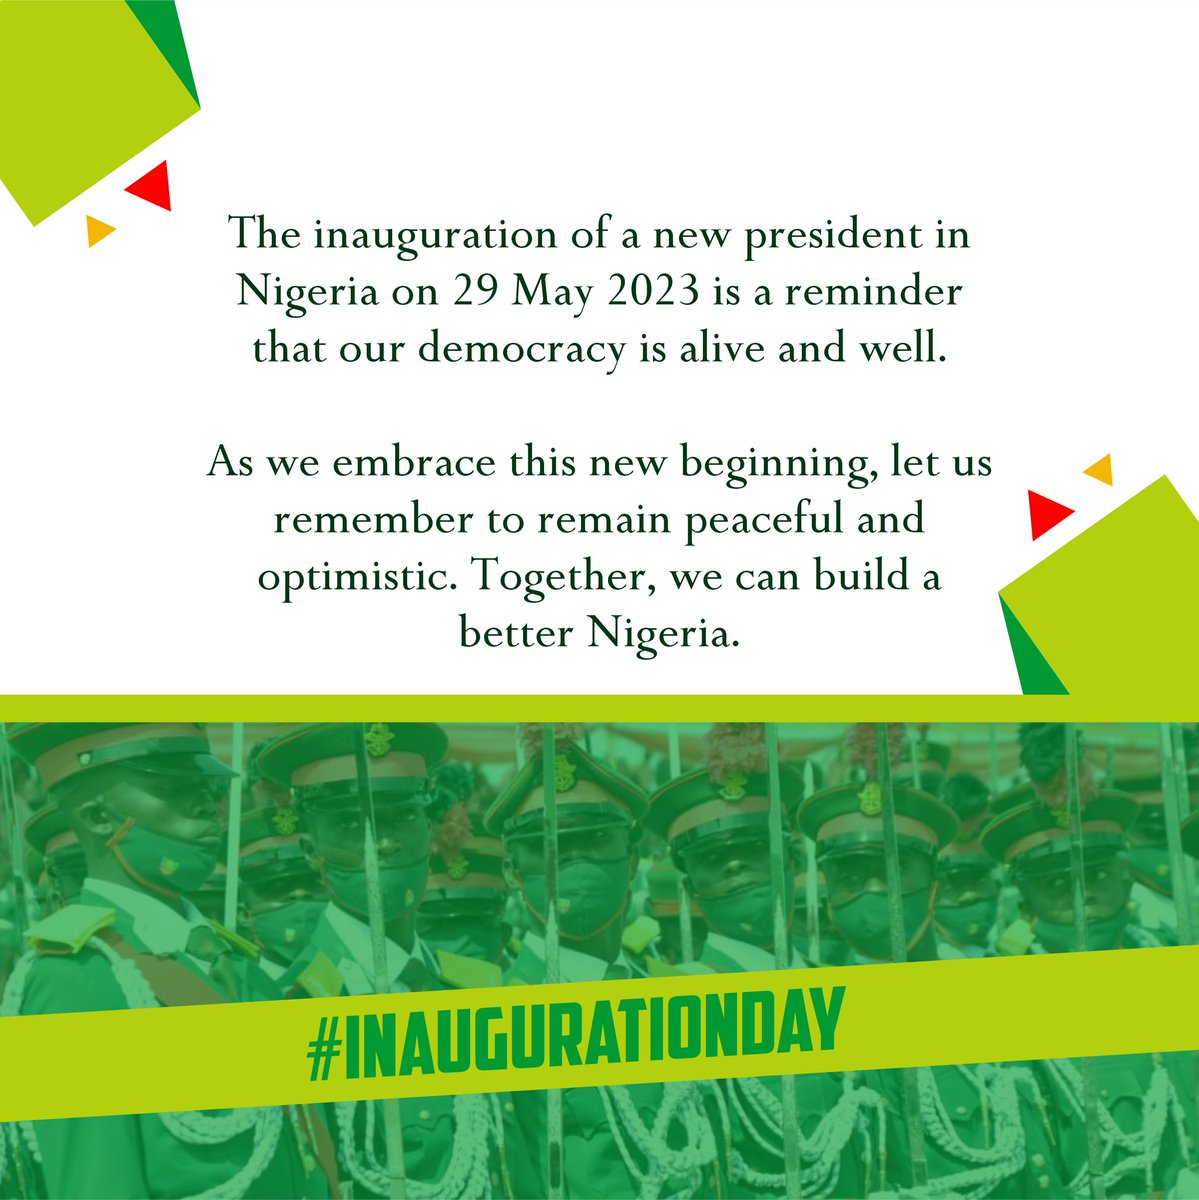 Our democracy is alive and well!! 

Let's embrace this new beginning, Let us stay Peaceful and Optimistic!!!
#InaugurationDay 
#HopeForNigeria